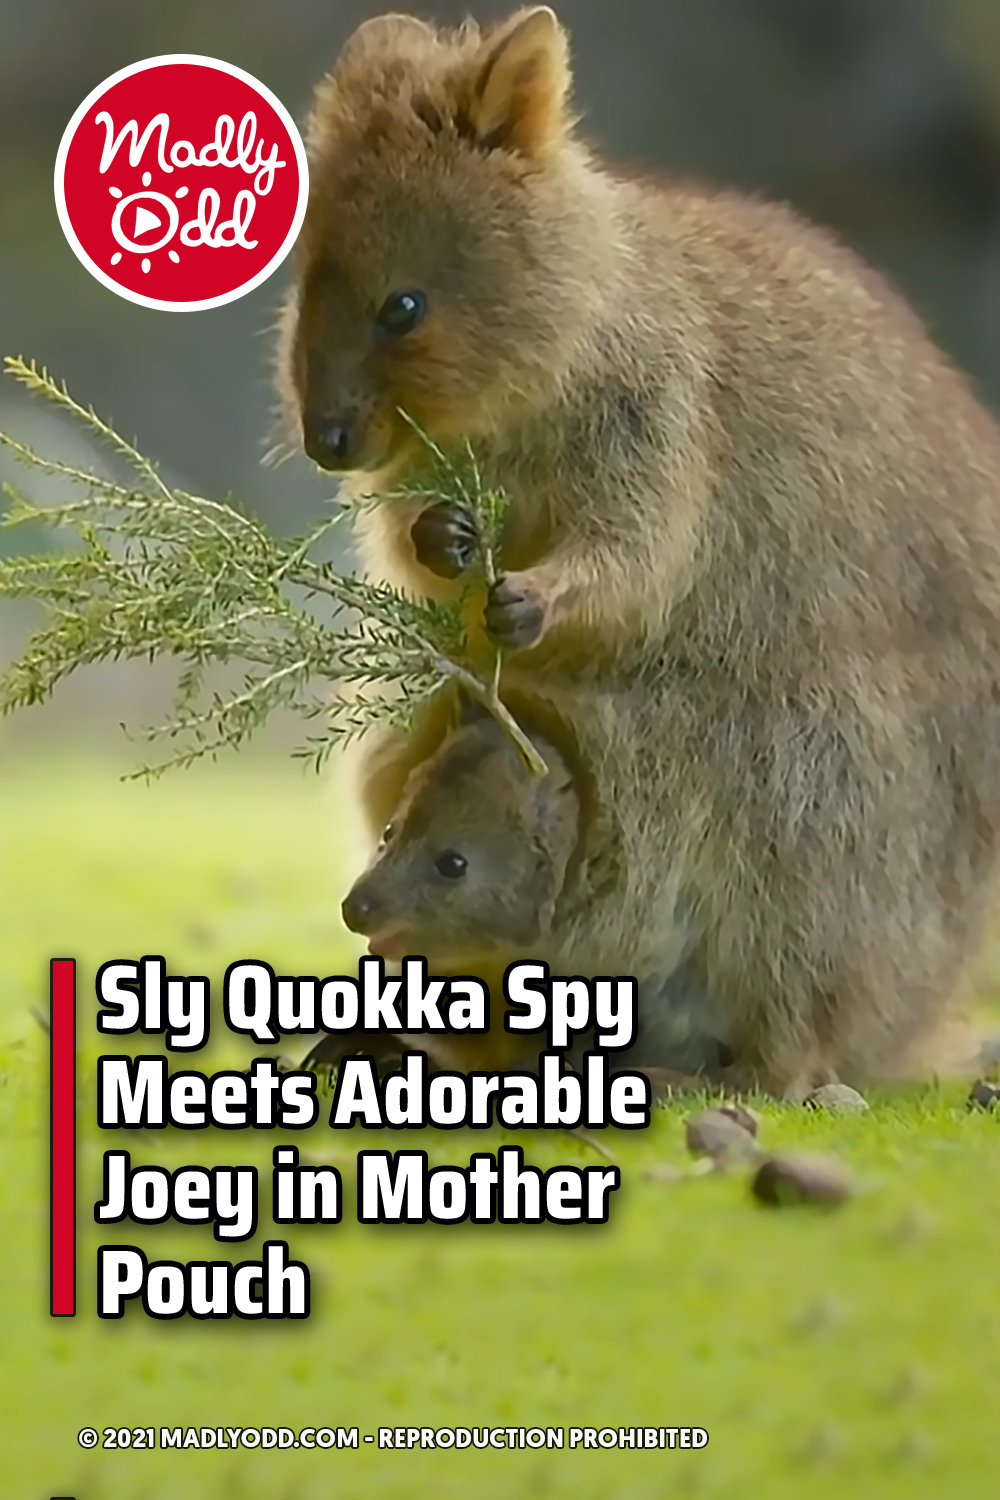 Sly Quokka Spy Meets Adorable Joey in Mother Pouch